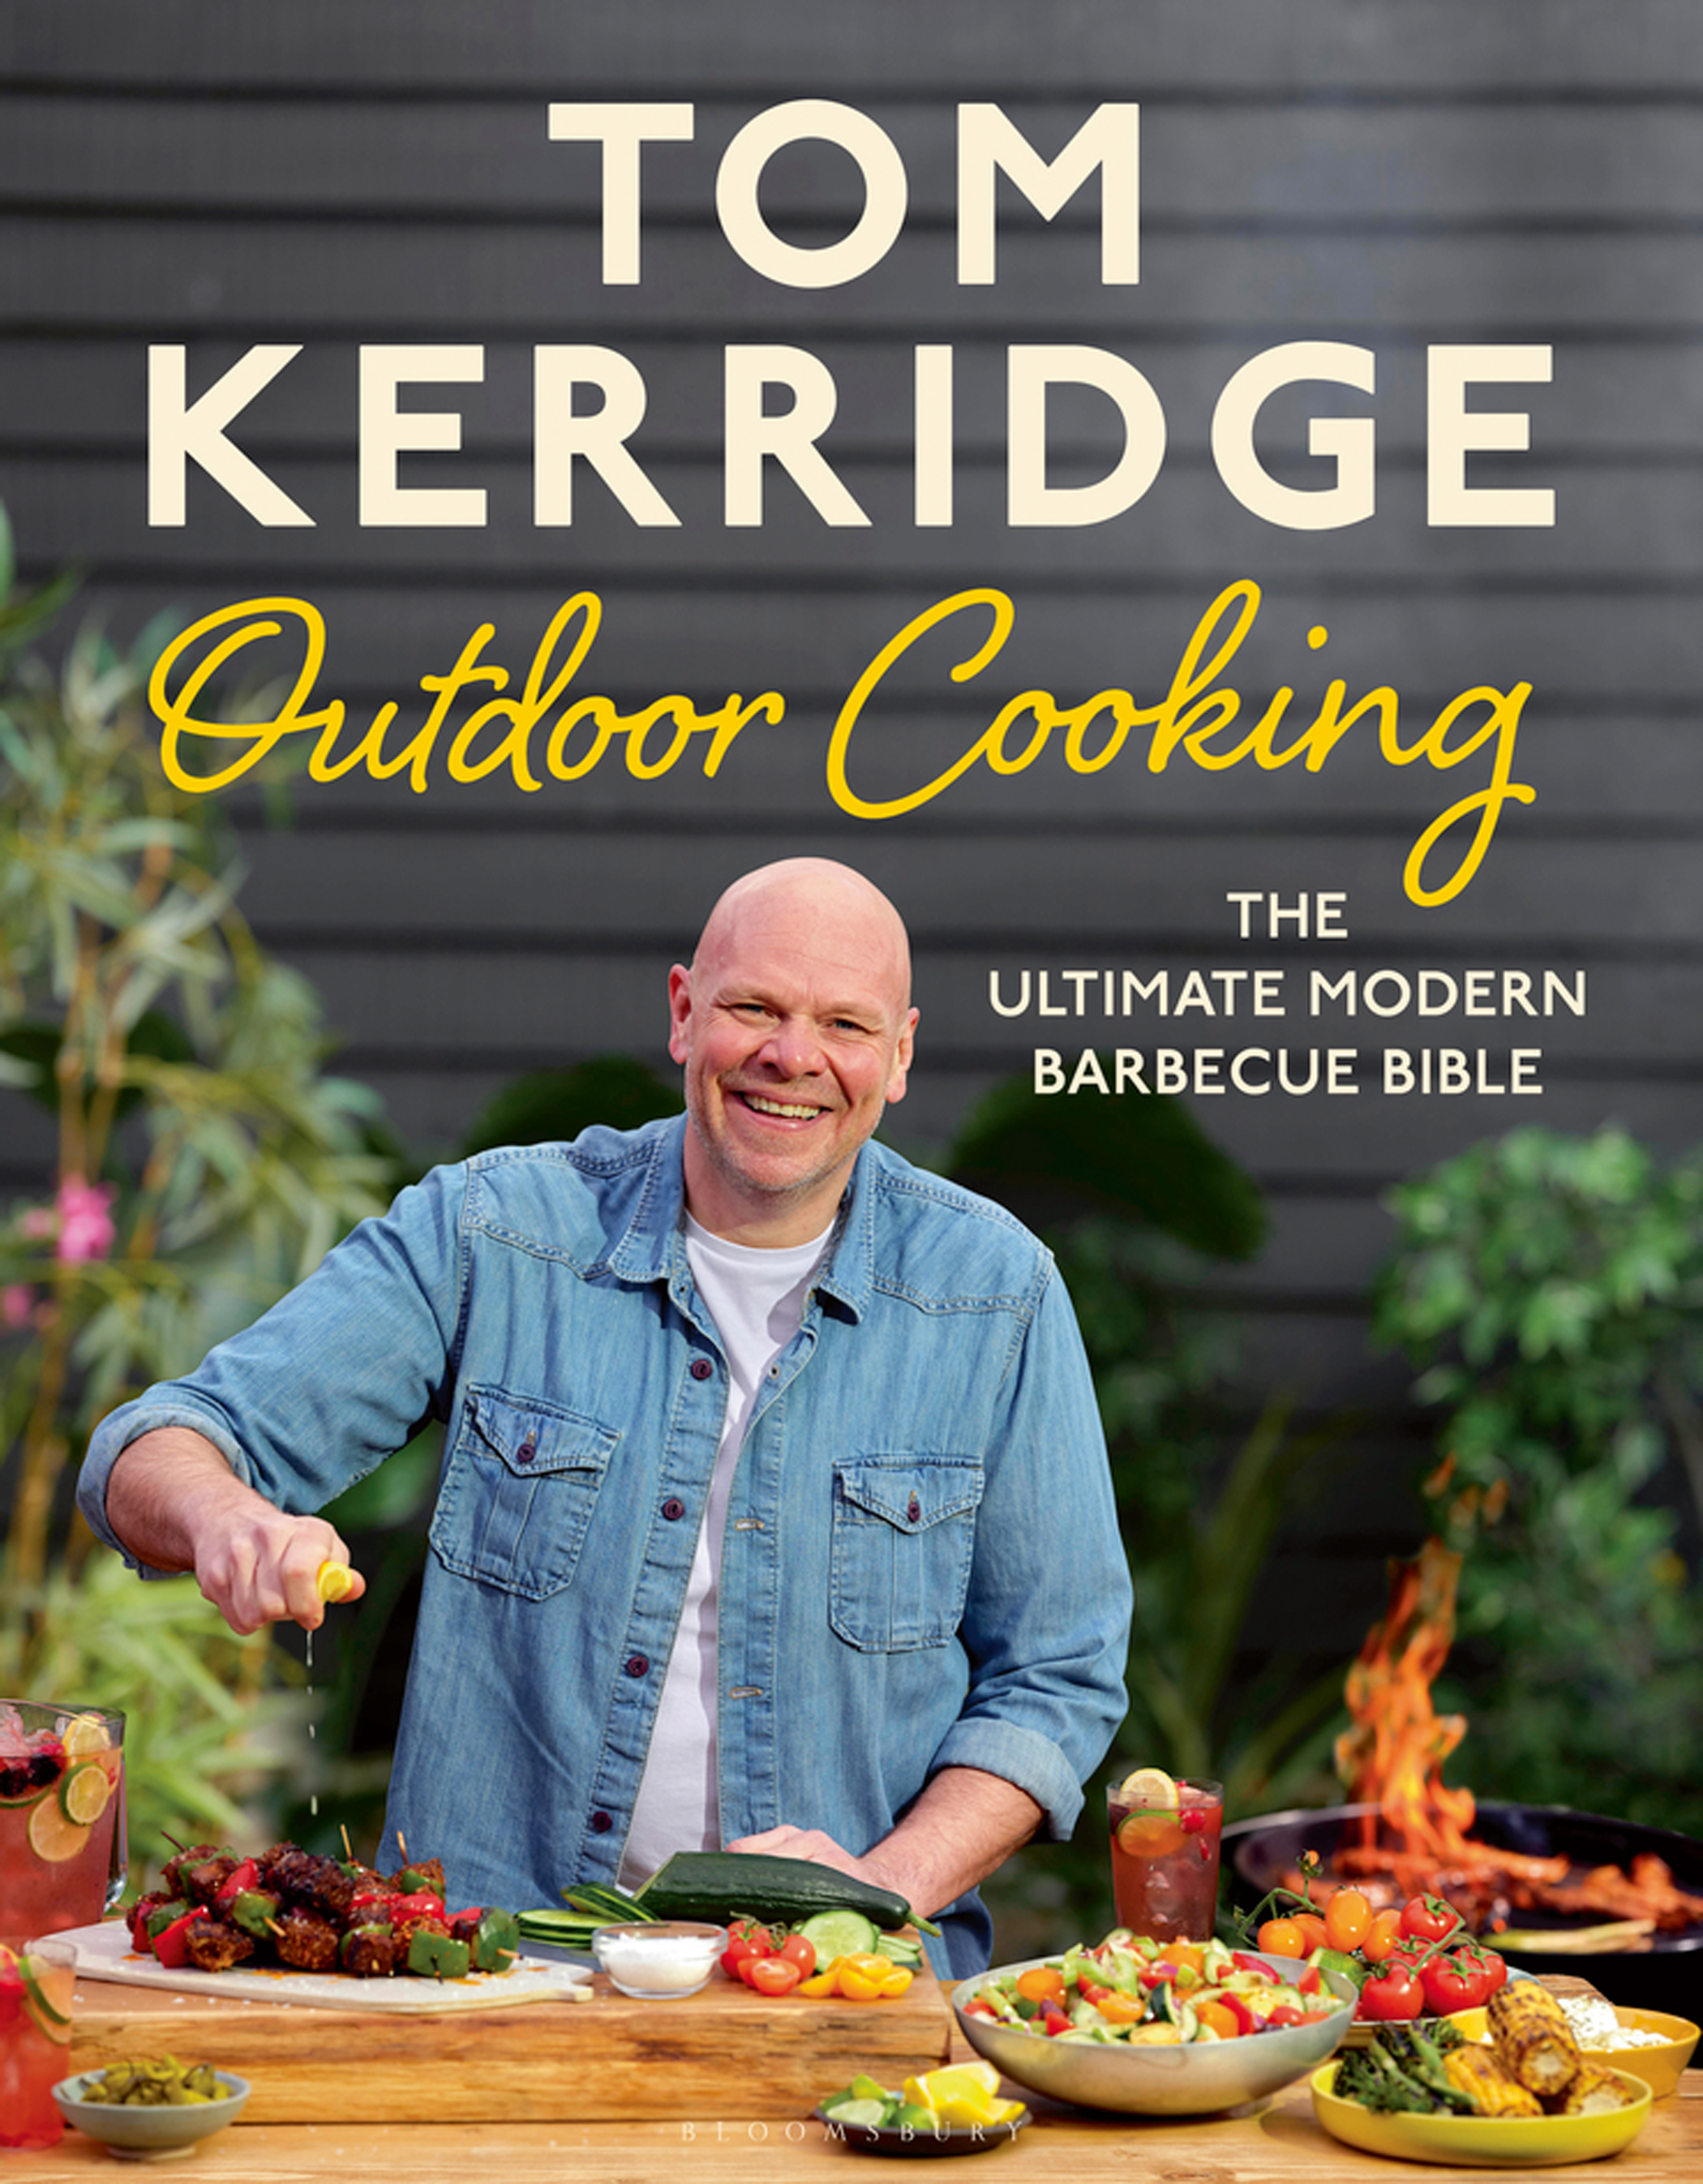 Outdoor Cooking: The Ultimate Modern Barbecue Bible by Tom Kerridge